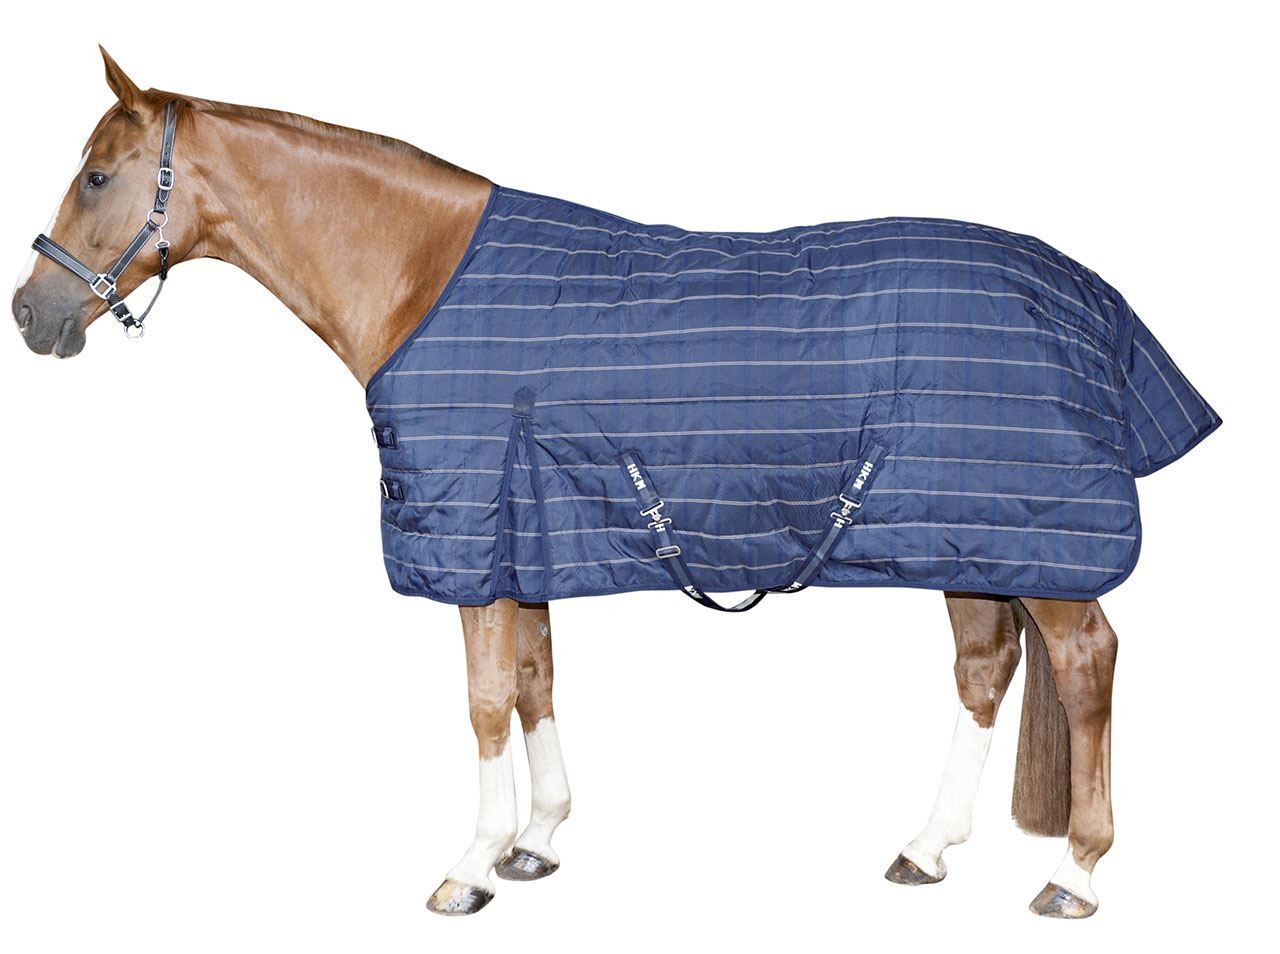 HKM Winter Stable Rug With 200G Filling, 1200D - Just Horse Riders